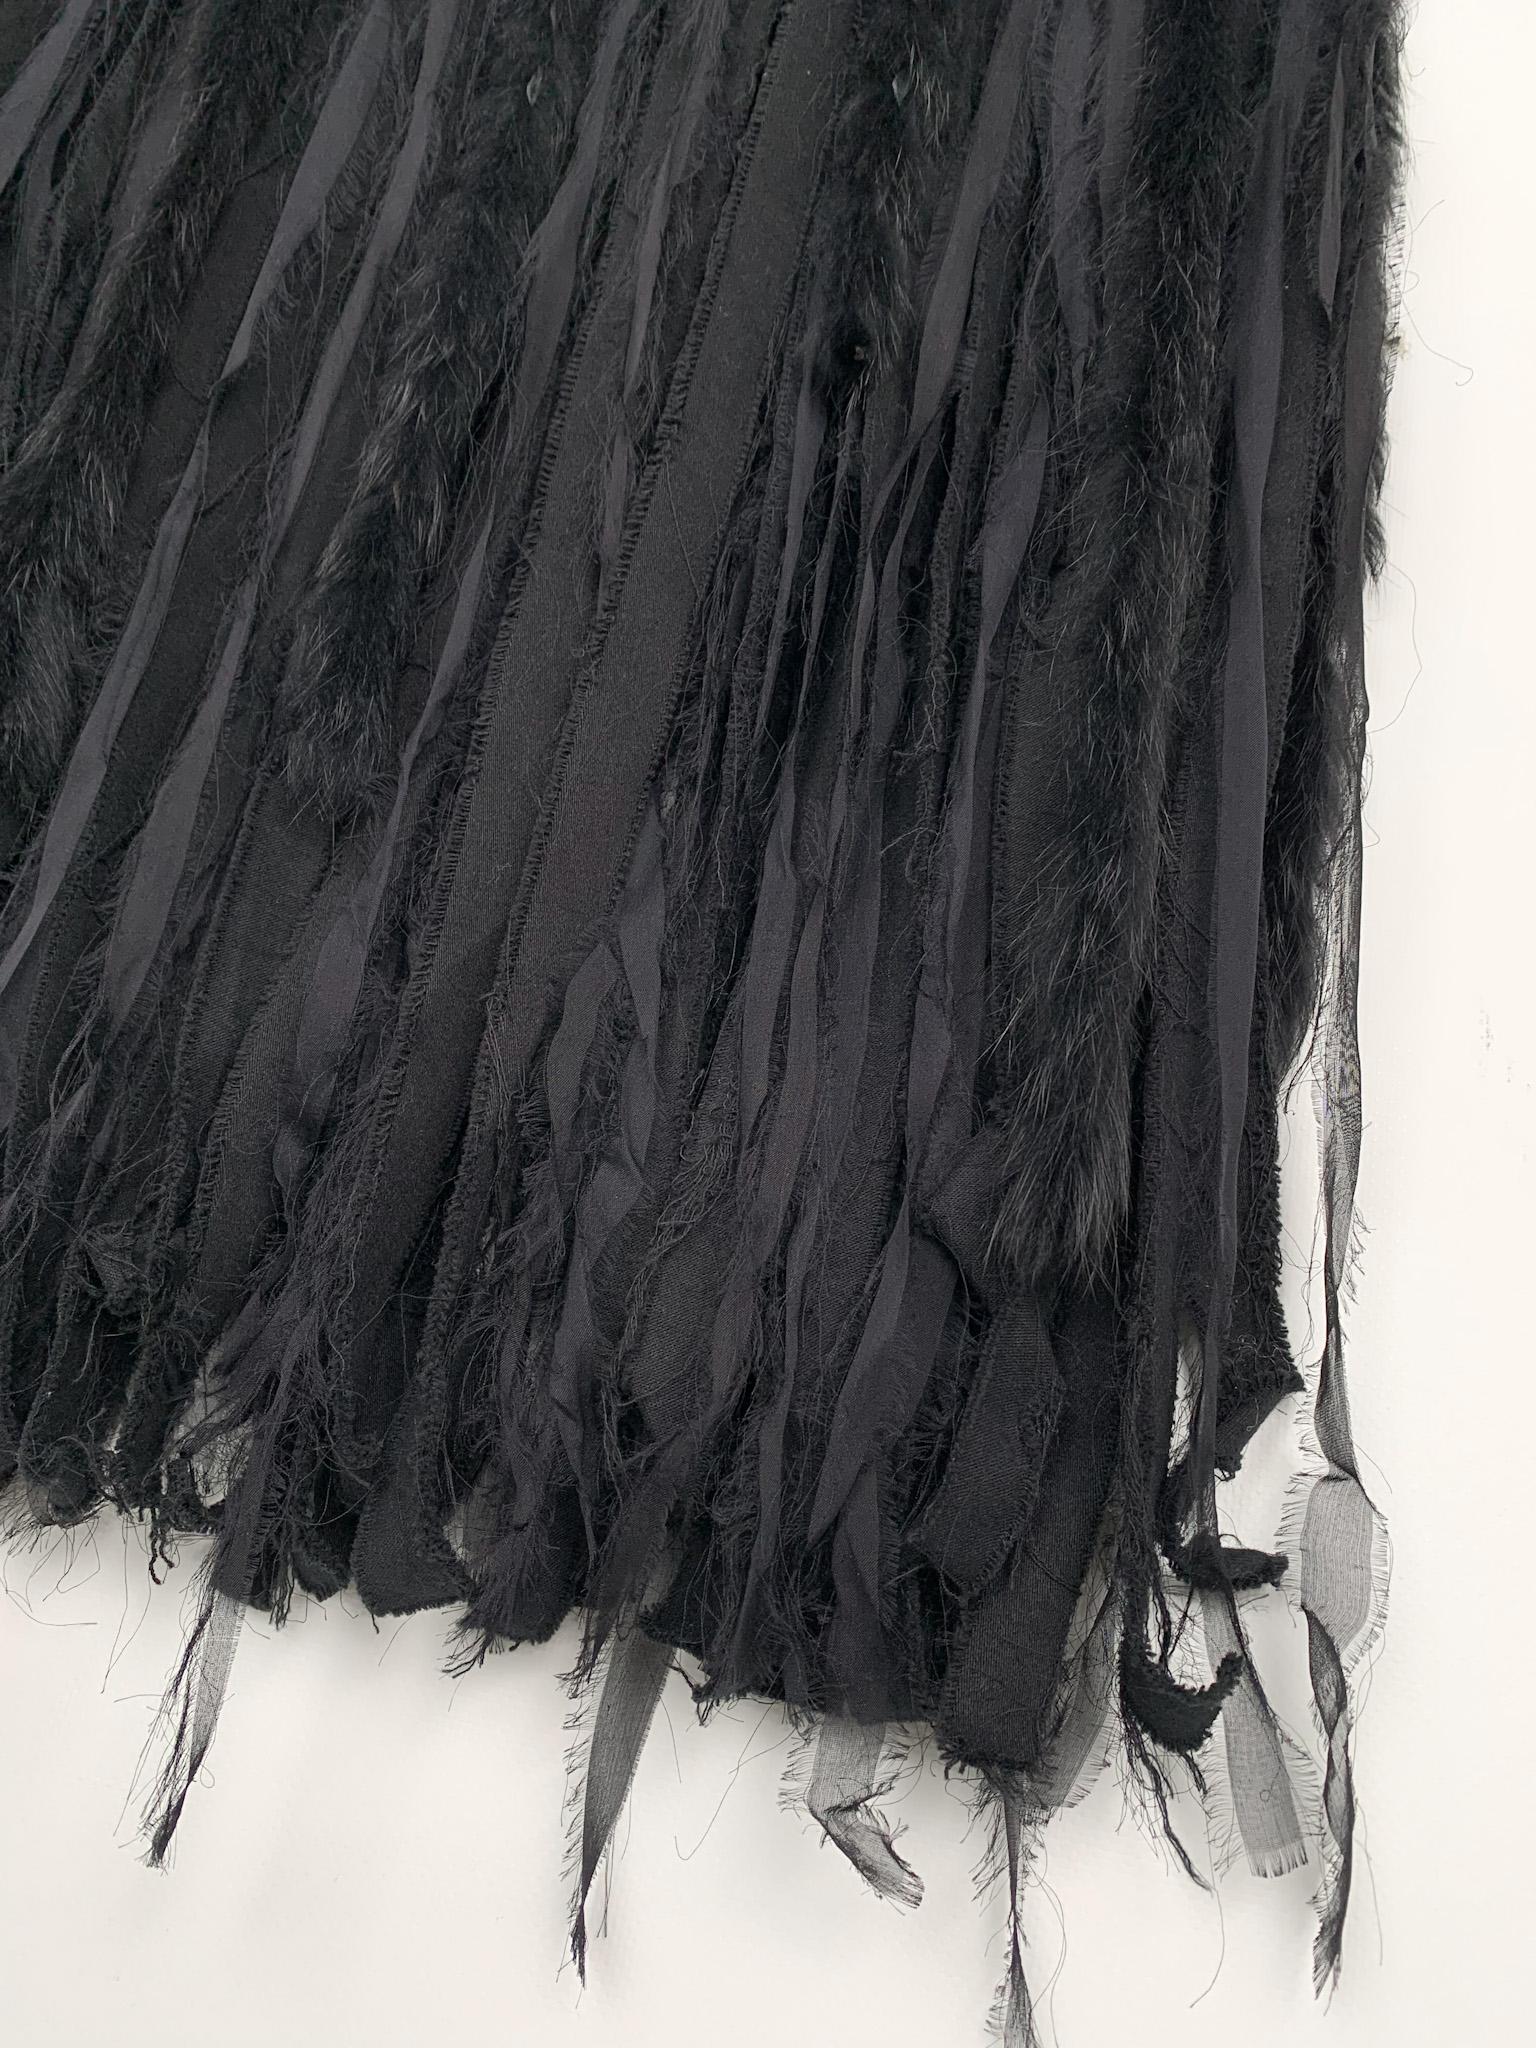 Ungaro Fever vintage 1990s (?) black denim maxi skirt, a statement-making piece that exudes a sense of flair and artistry. Made from mid-weight elastic denim, this skirt features an extravagant fringe detail that sets it apart. The fringe is made